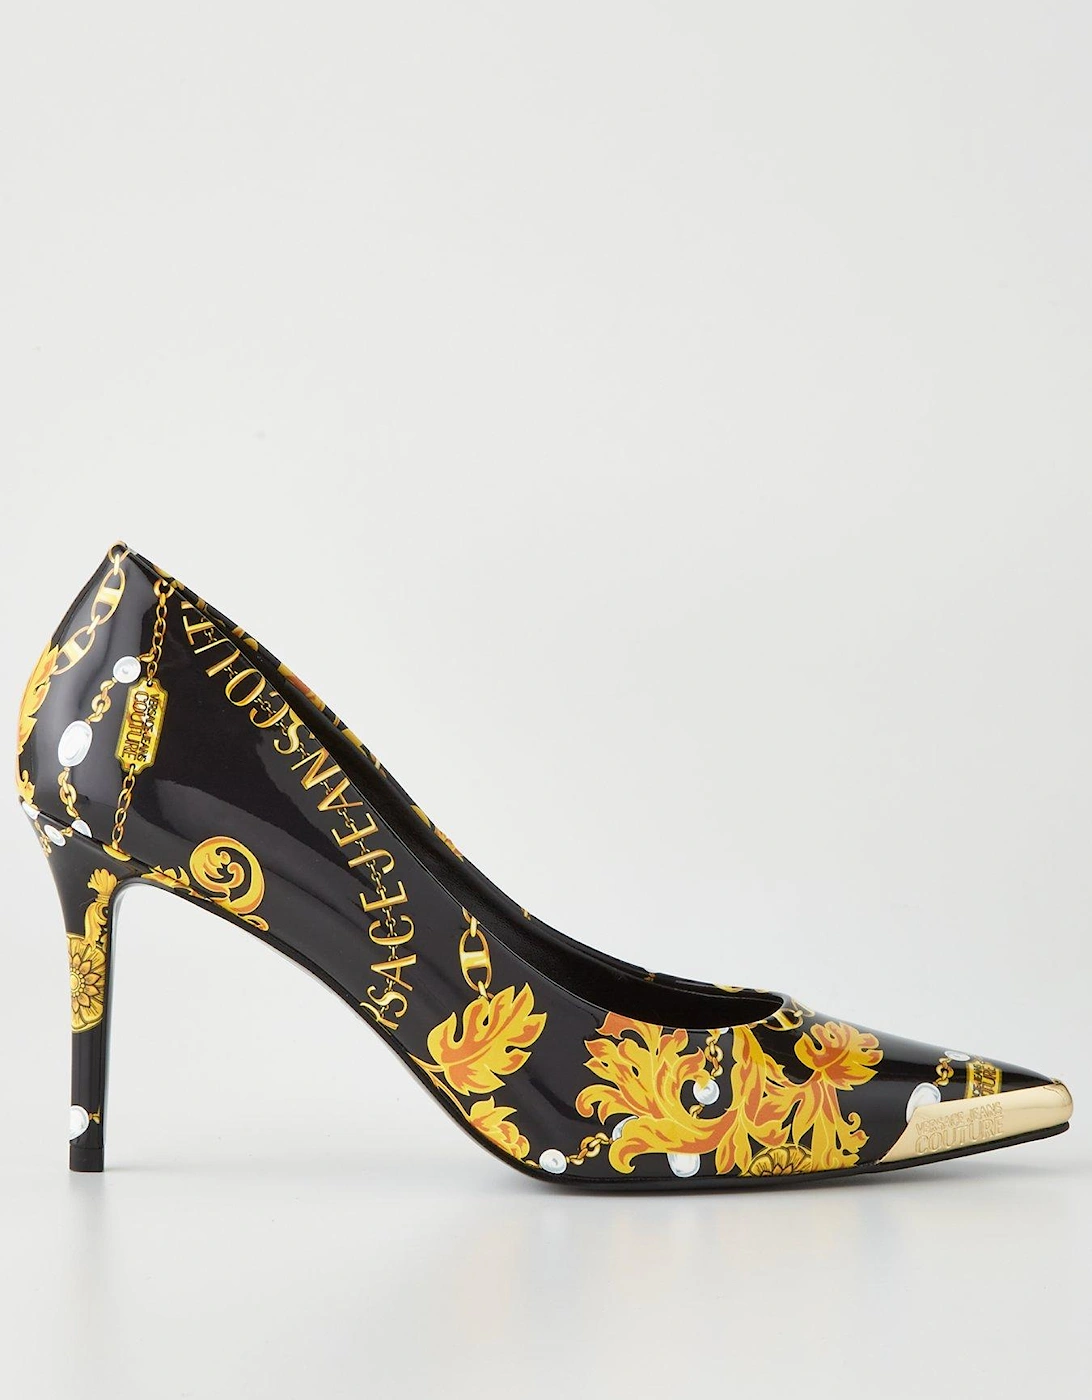 All Over Baroque Print Heeled Pumps - Black/Gold, 3 of 2